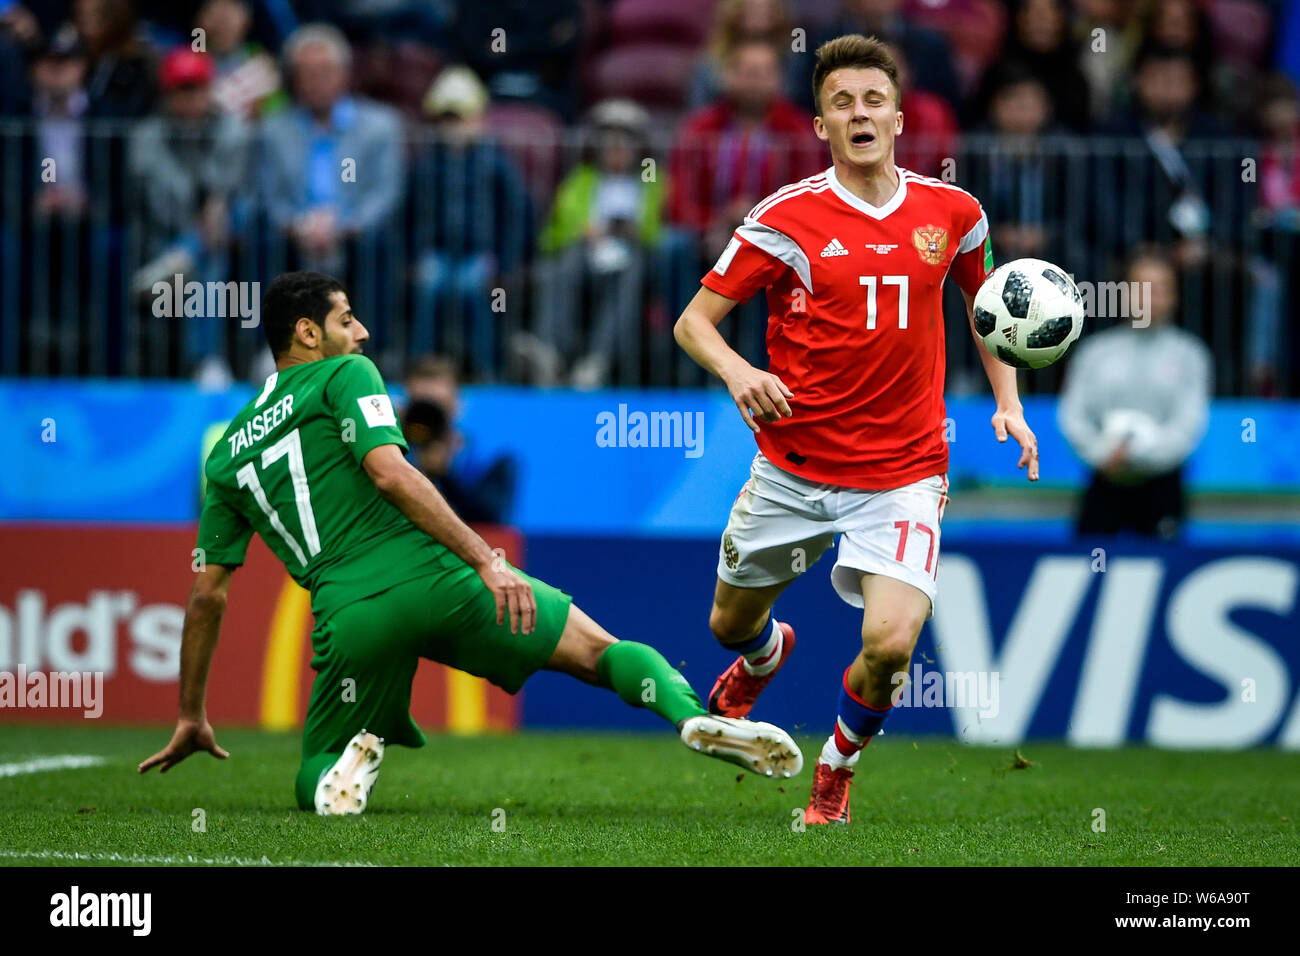 Aleksandr Golovin of Russia, right, challenges Taisir Al-Jassim of Saudi Arabia in their Group A match during the 2018 FIFA World Cup in Moscow, Russi Stock Photo